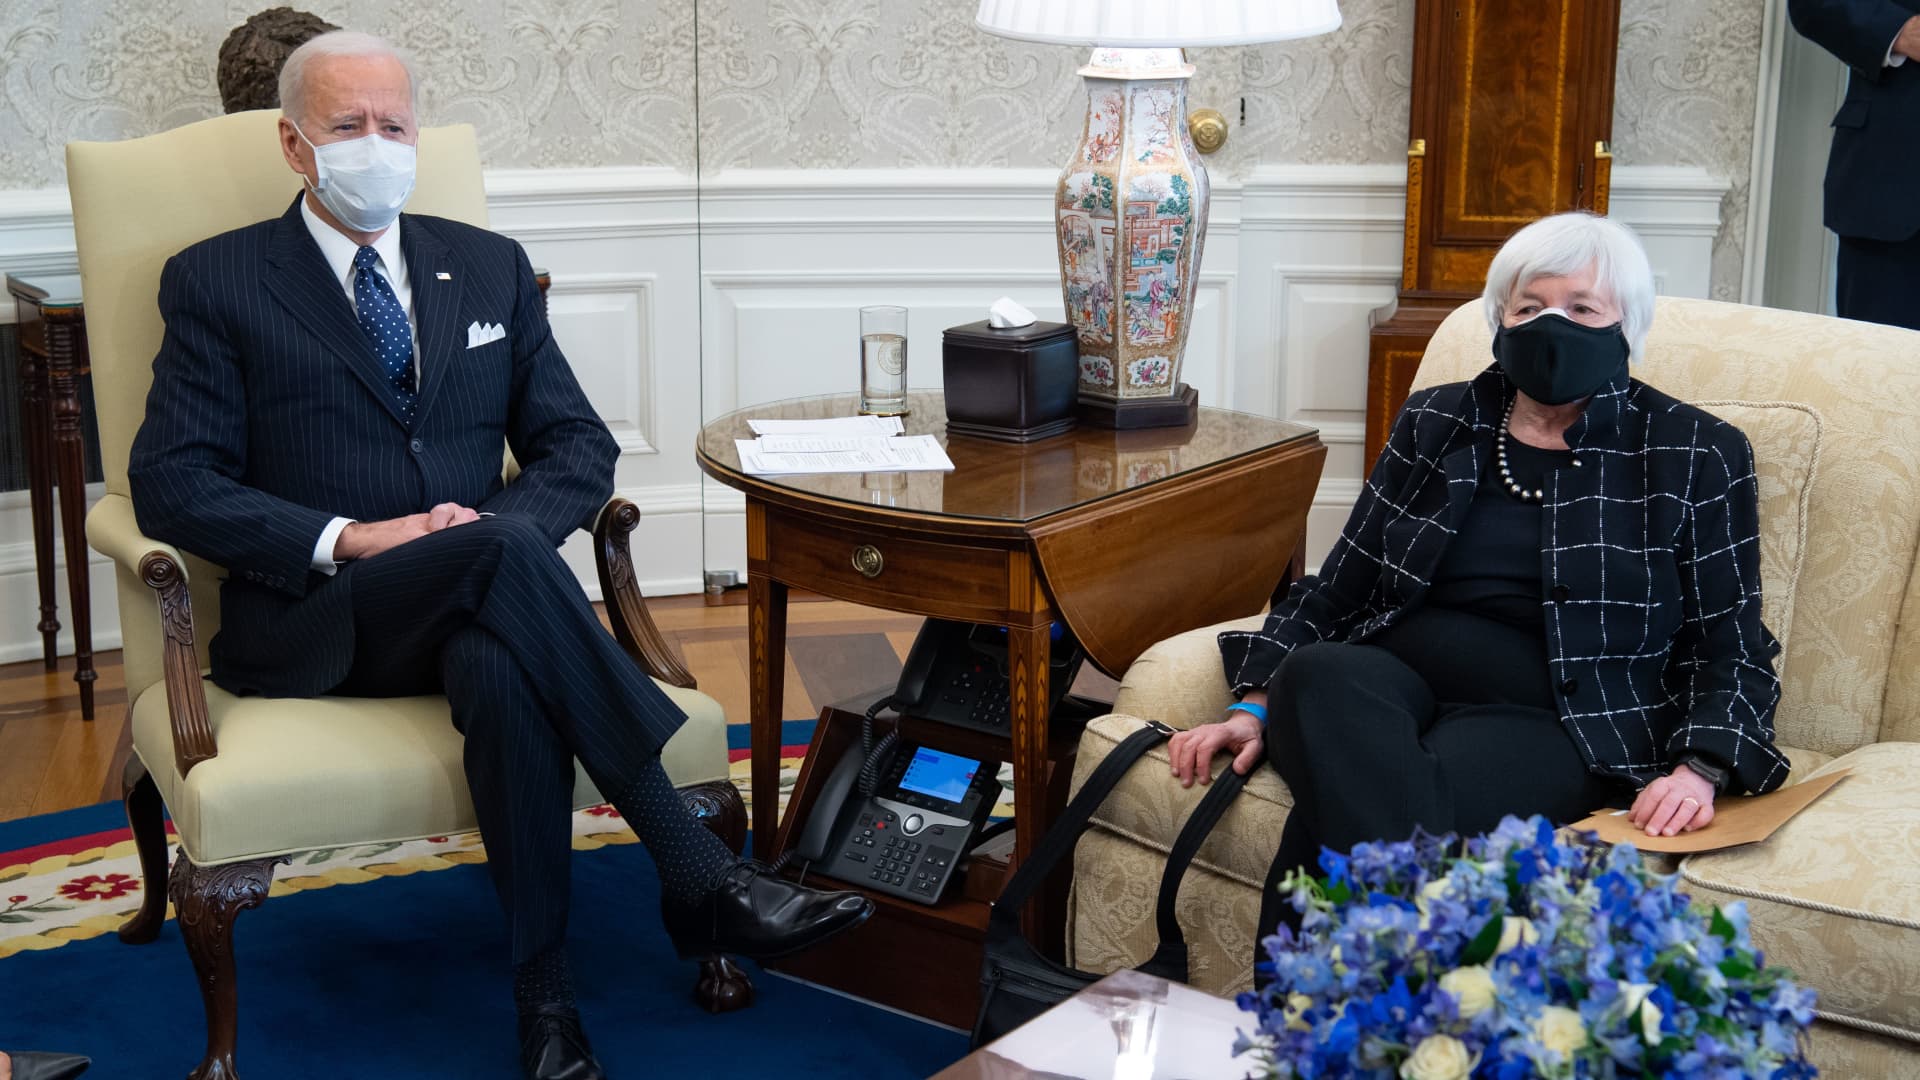 President Joe Biden sits alongside US Treasury Secretary Janet Yellen (R) as he holds a meeting with business leaders about a Covid relief bill in the Oval Office of the White House in Washington, DC, February 9, 2021.